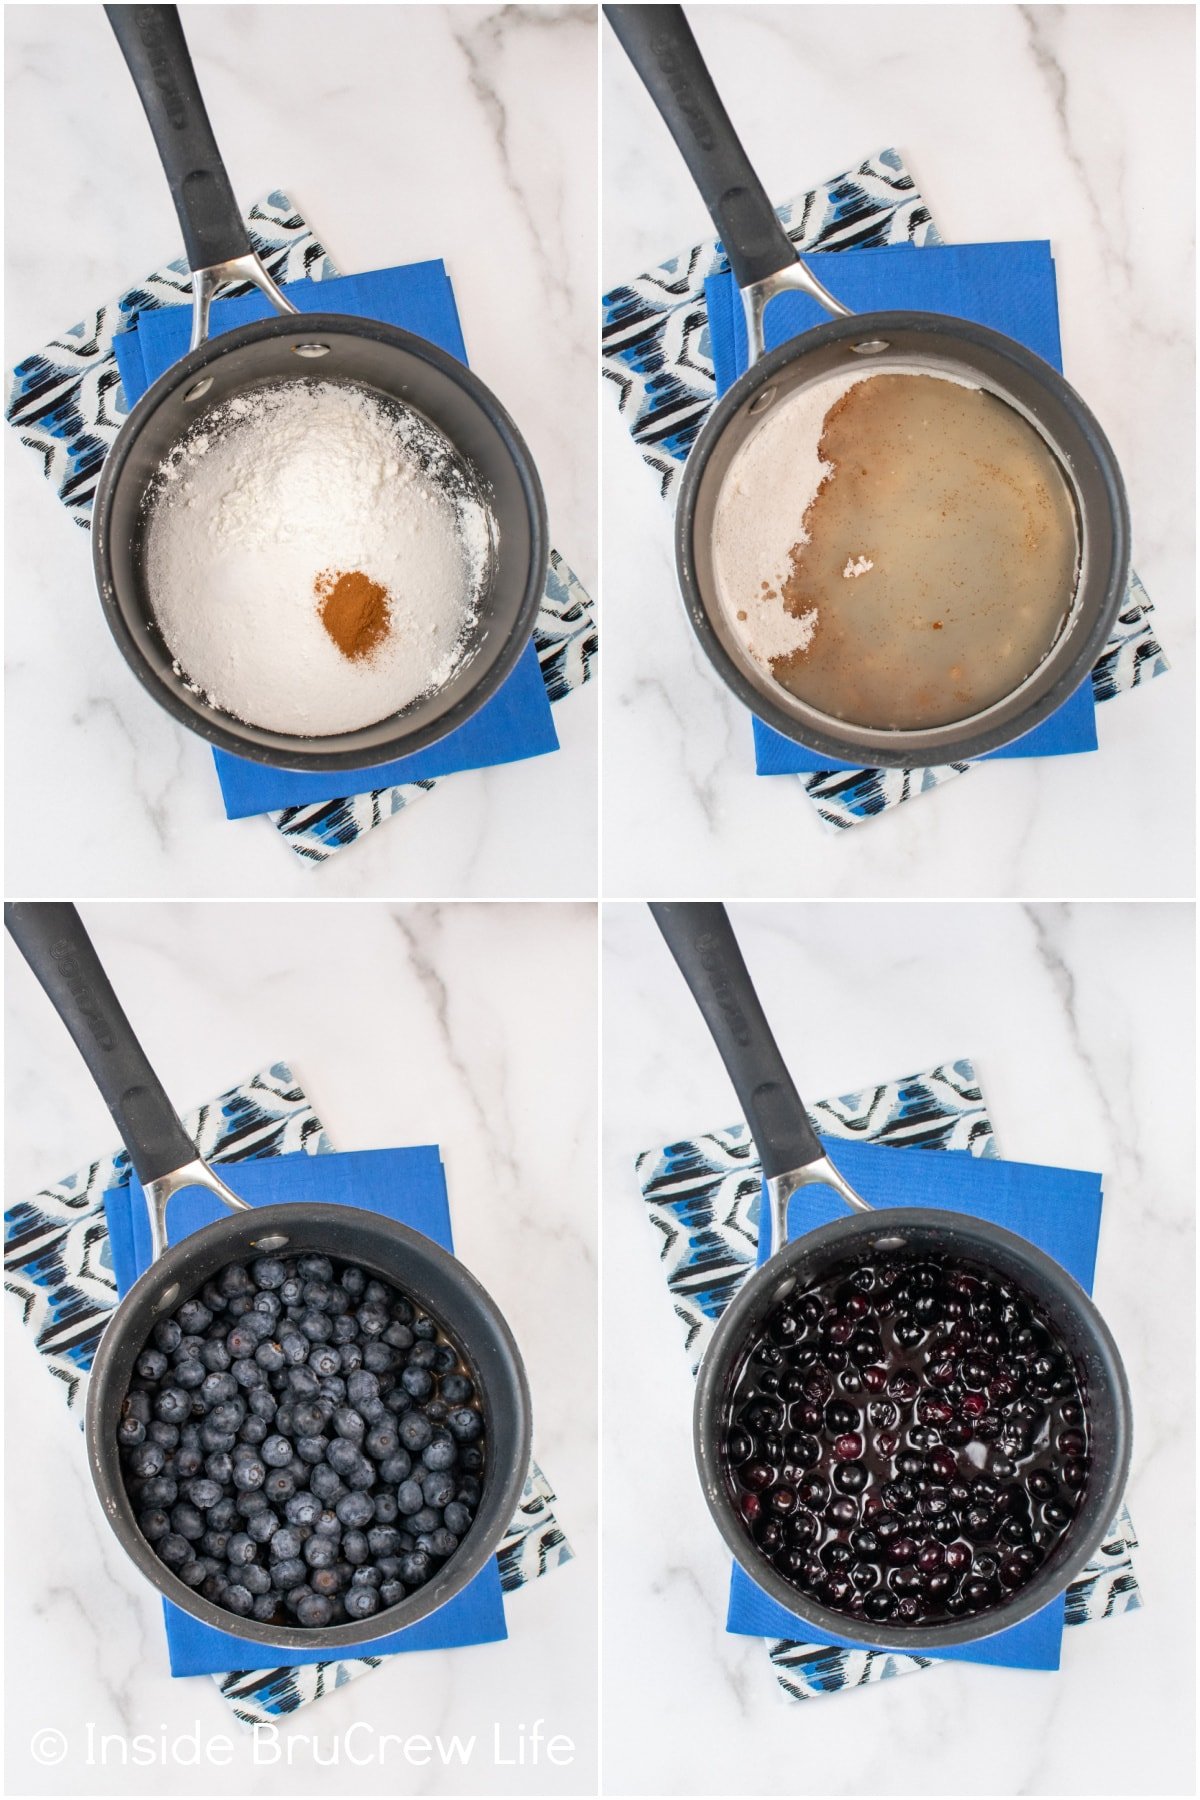 Four pictures collaged together showing how to cook fresh blueberries.